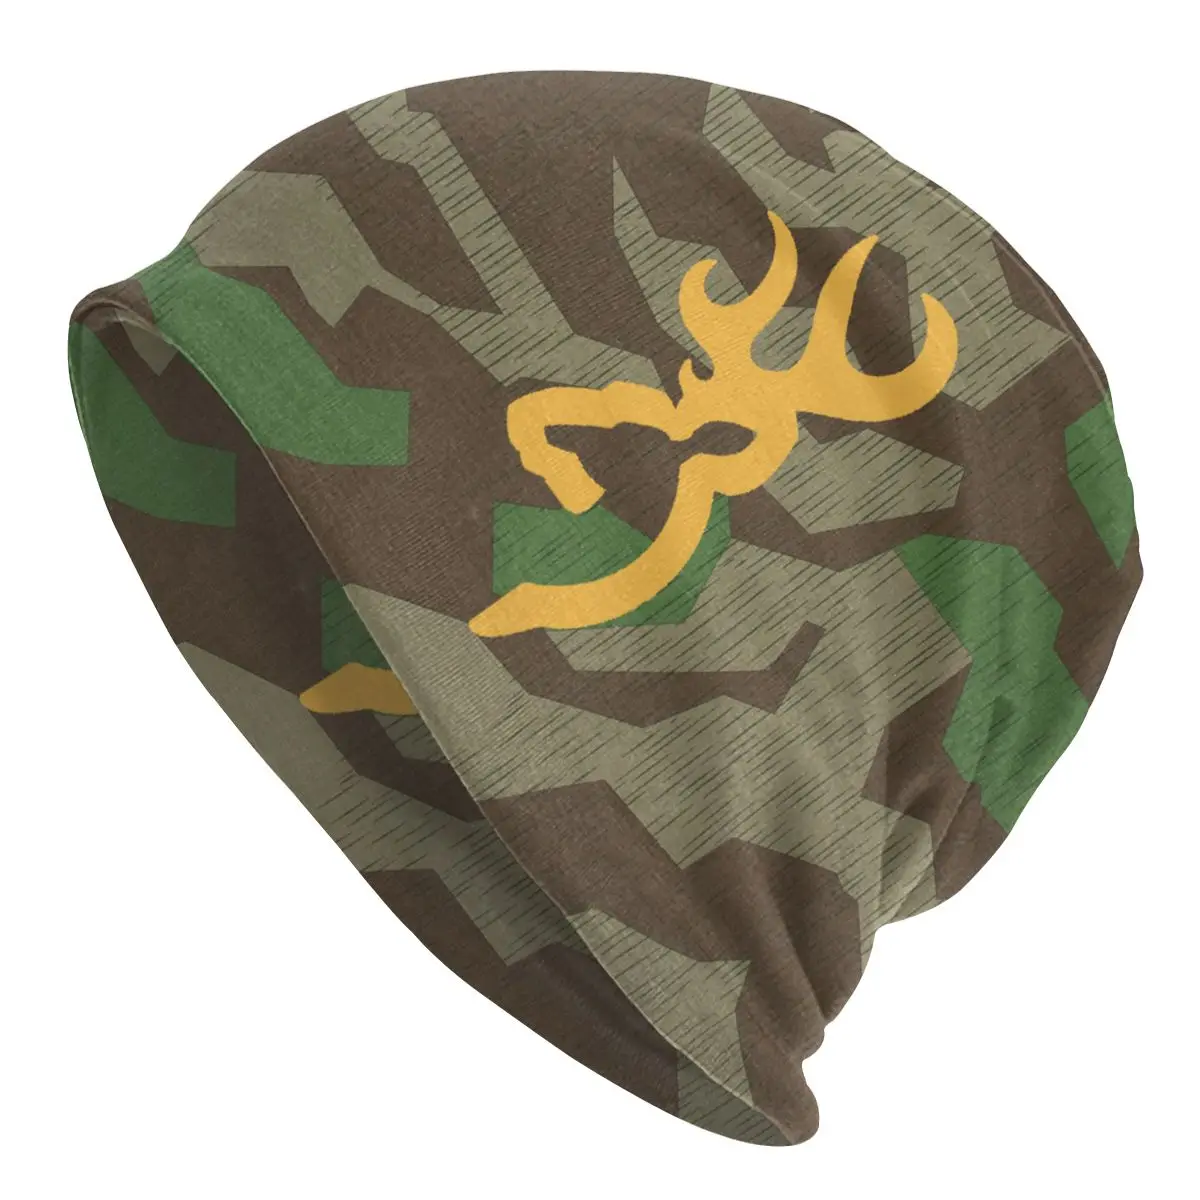 

Browning Camouflage Bonnet Femme Hip Hop Knitted Hat For Men Women Autumn Winter Warm Army Military Camo Skullies Beanies Caps